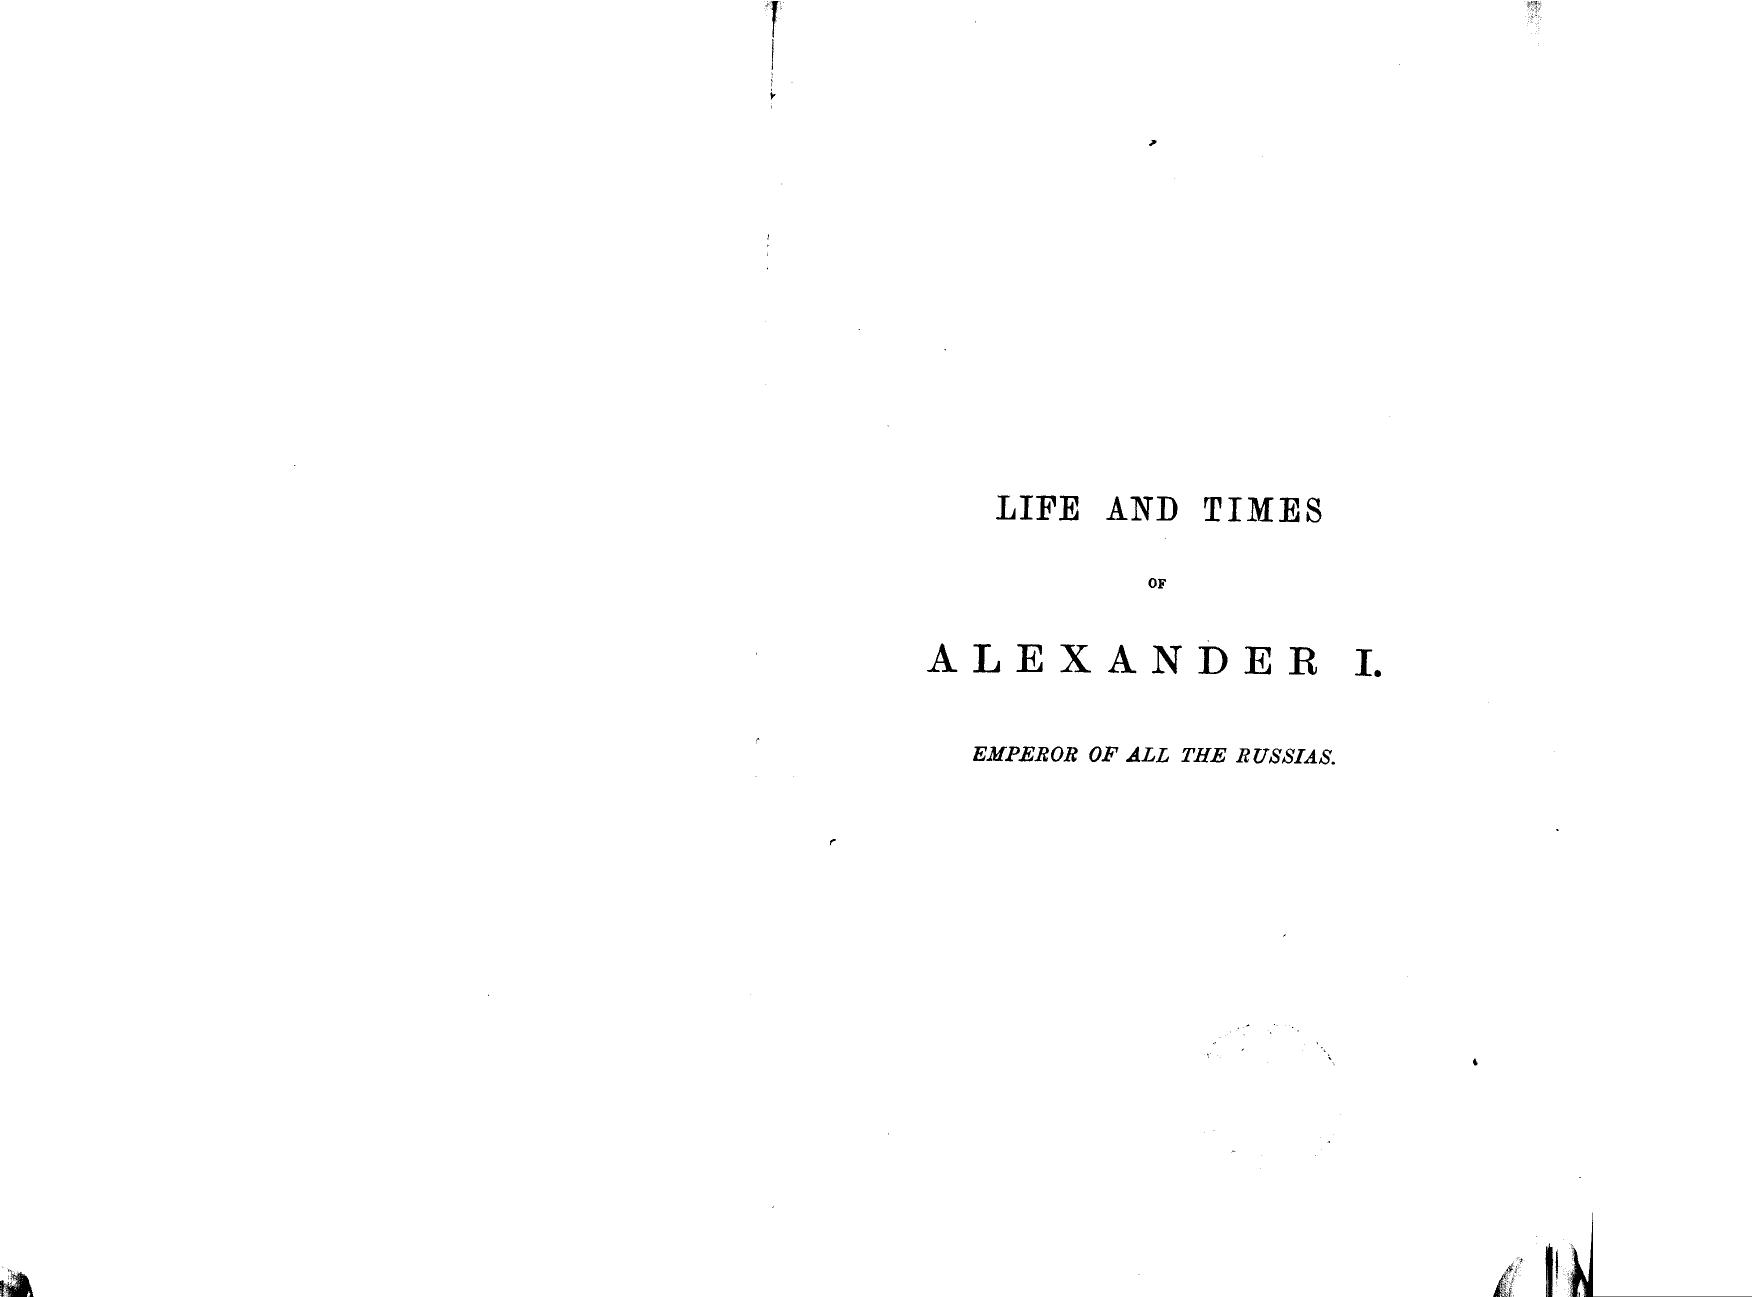 BY C. Joyneville - Life and times of alexander i., emperor of all the russias  . vol. 1 by 1875